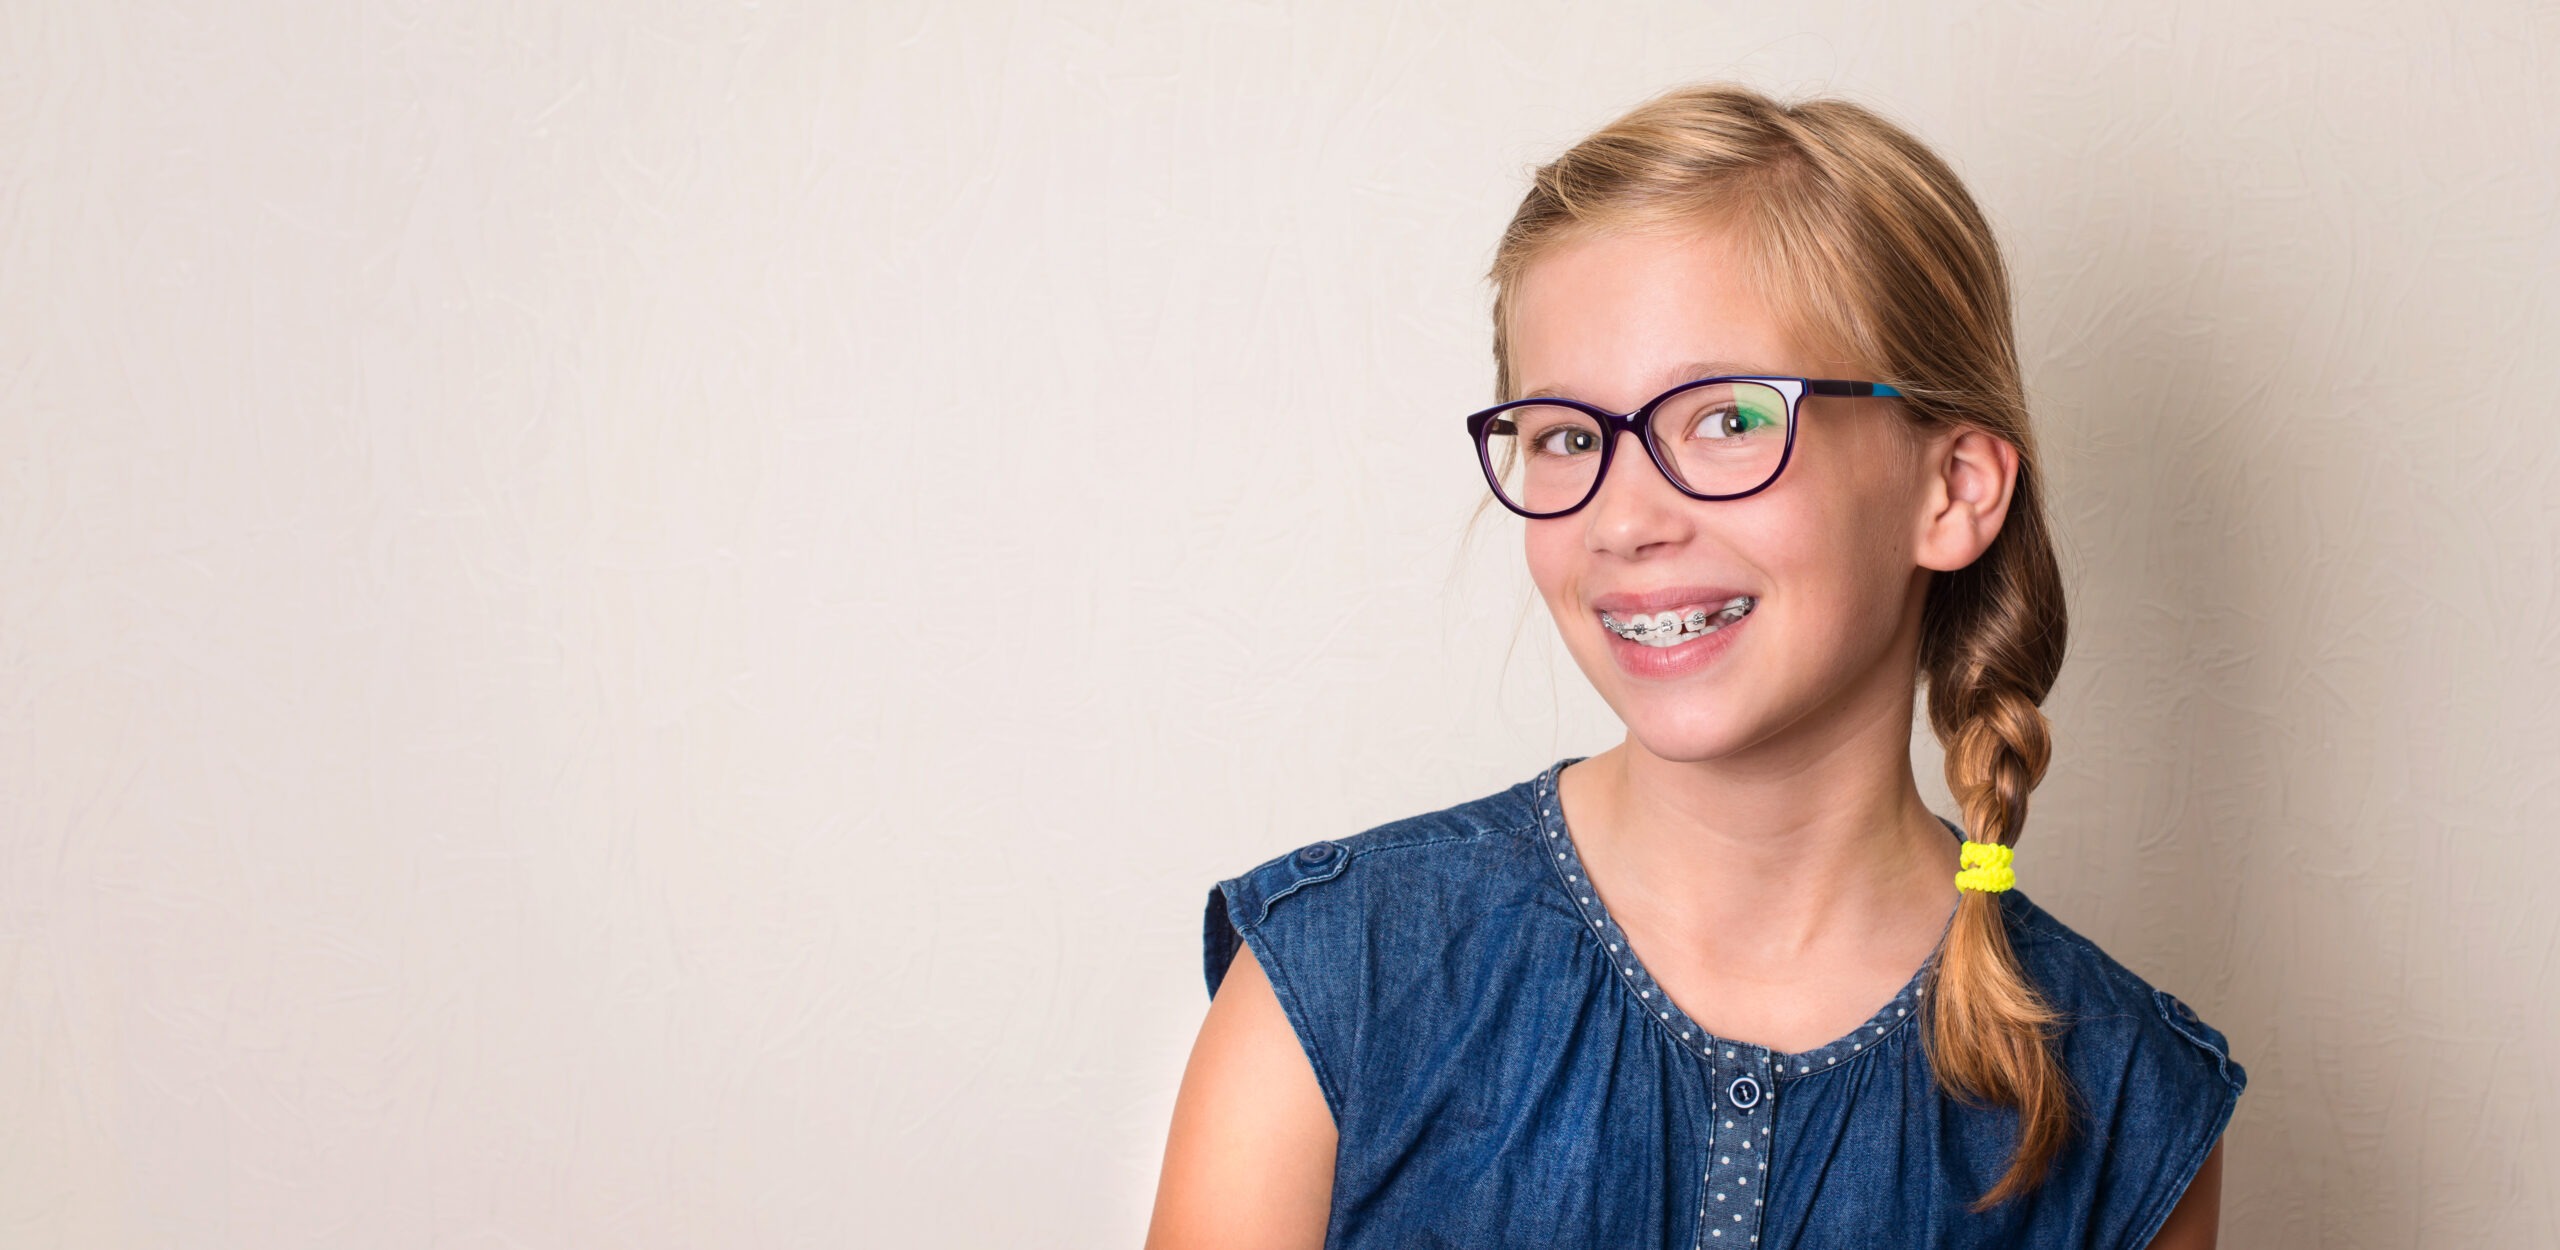 Wondering when's the best age for your child to start their orthodontic journey and get braces? If so, we're sharing all the details here!